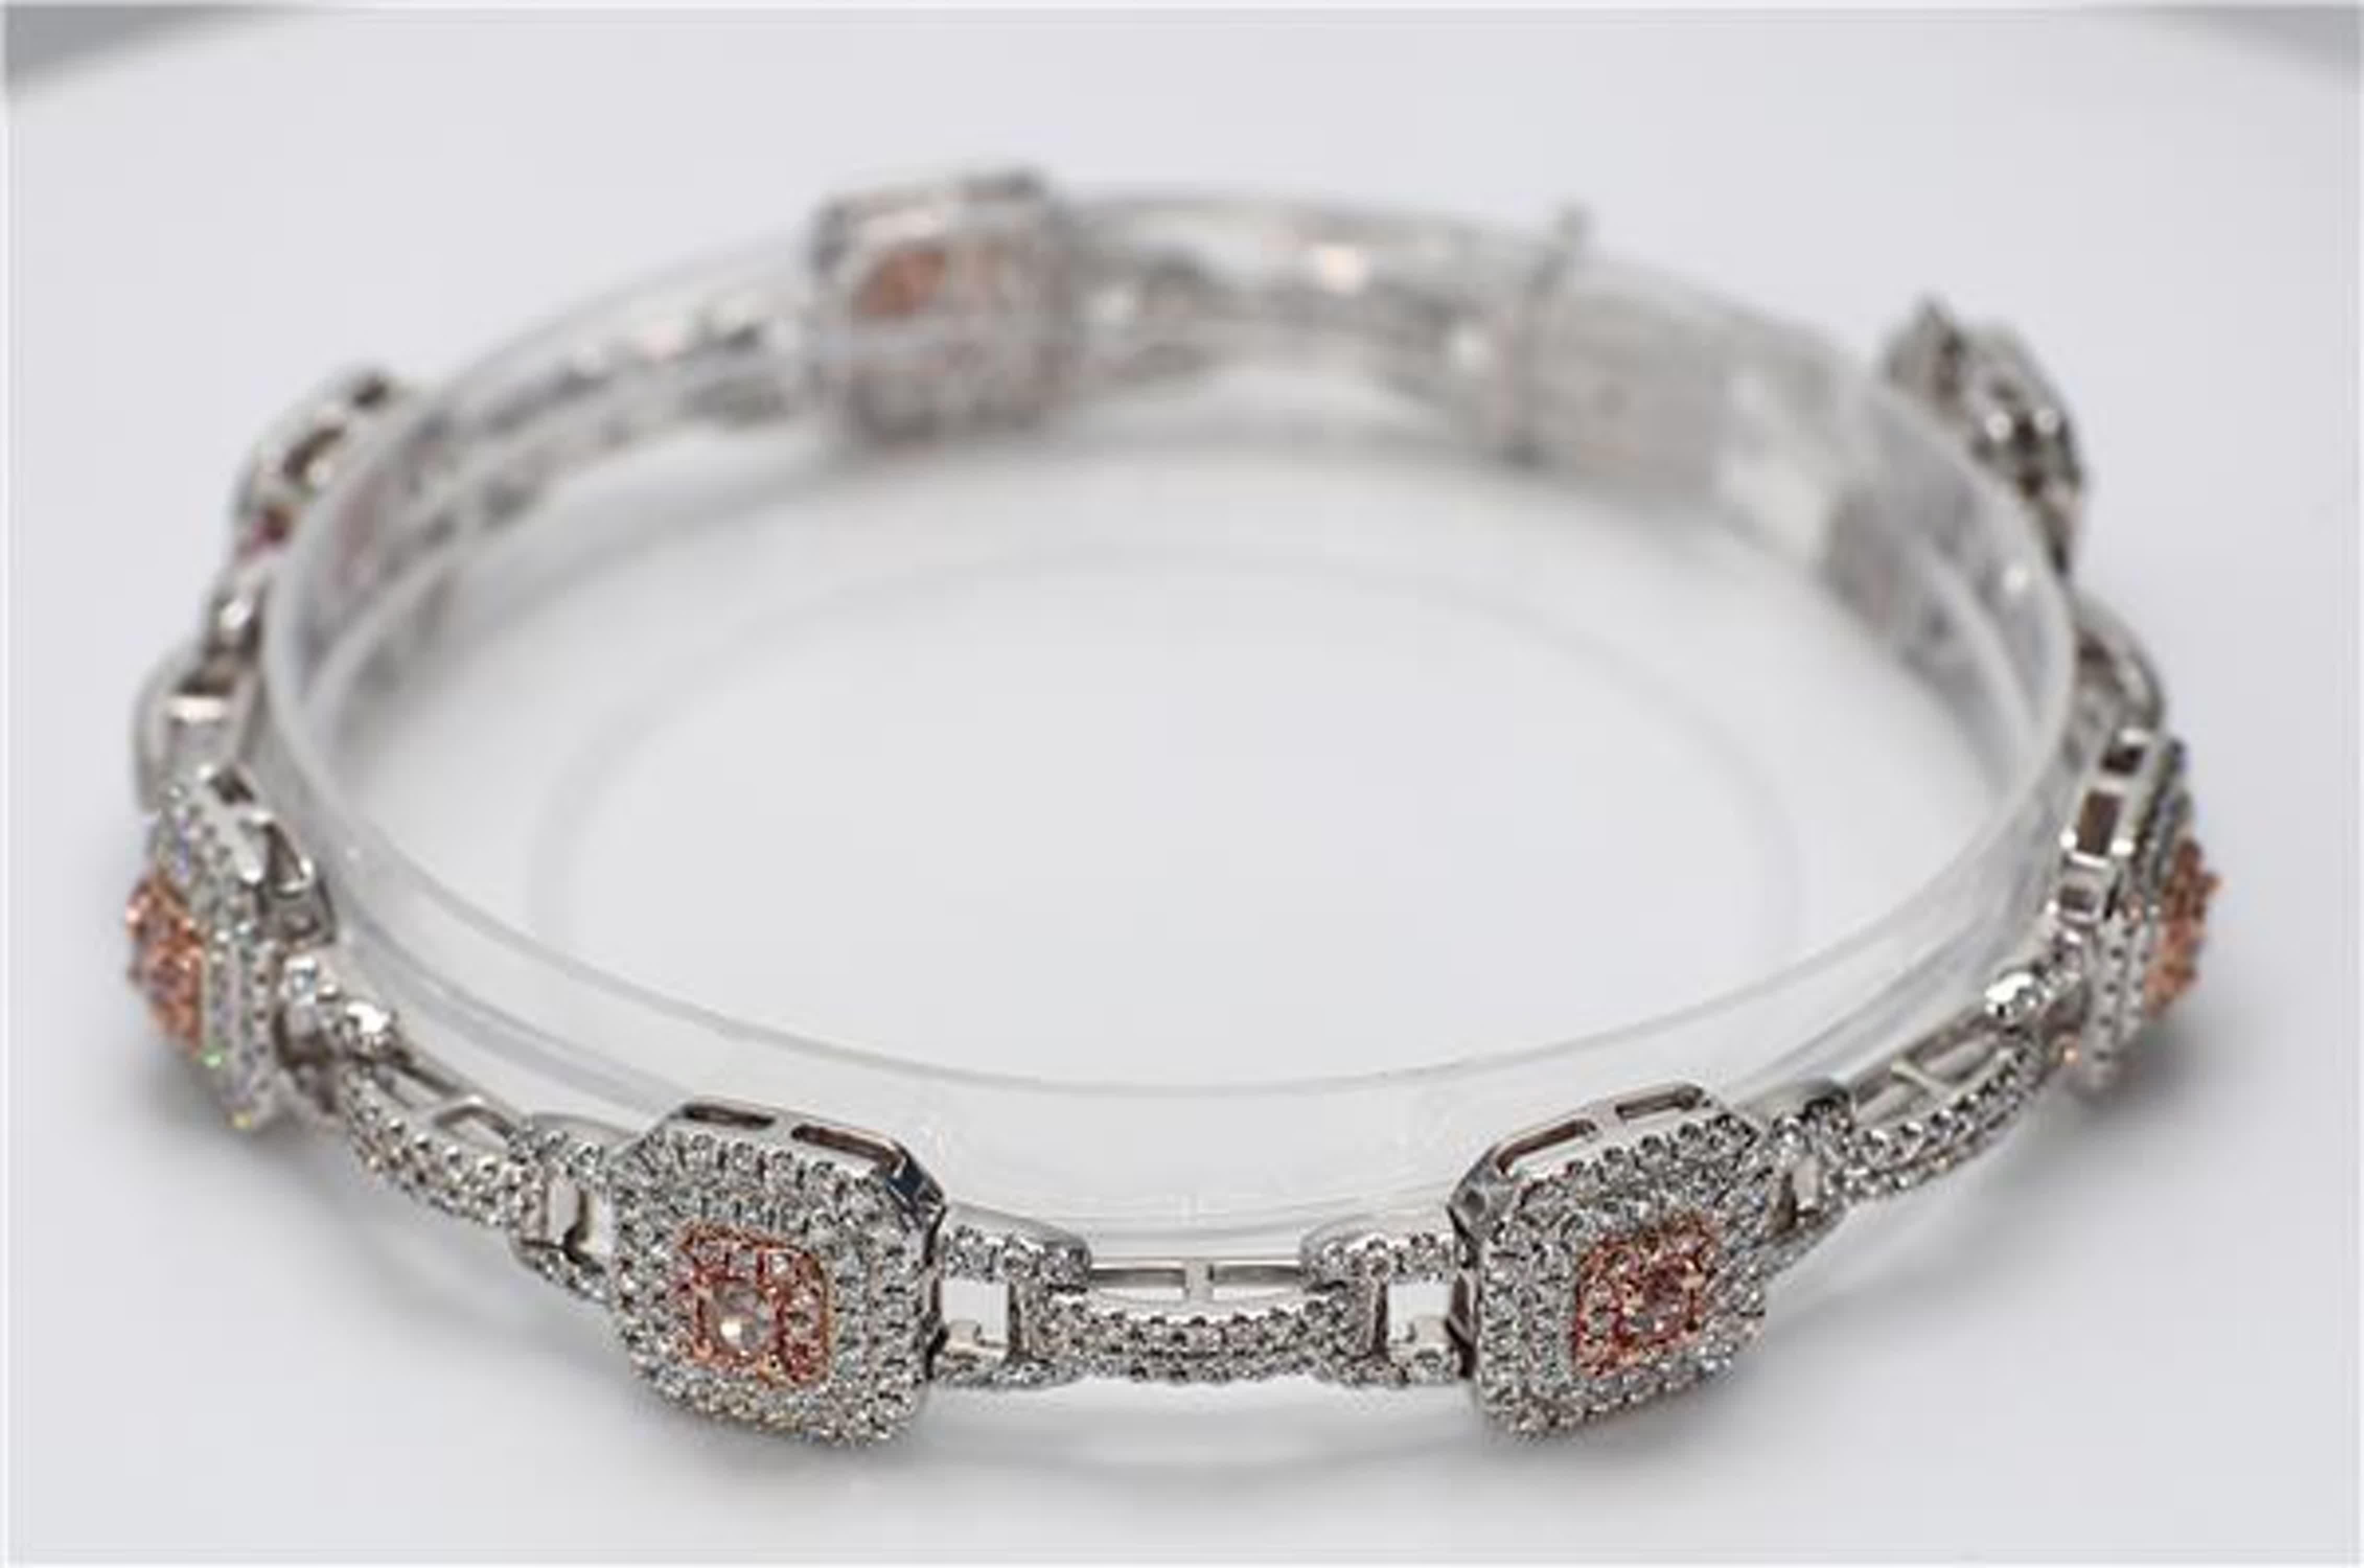 RareGemWorld's classic diamond bracelet. Mounted in a beautiful 18K Rose and White Gold setting with natural radiant cut pink diamonds. The pink diamonds are surrounded by small round natural white diamond melee and small round natural pink diamond